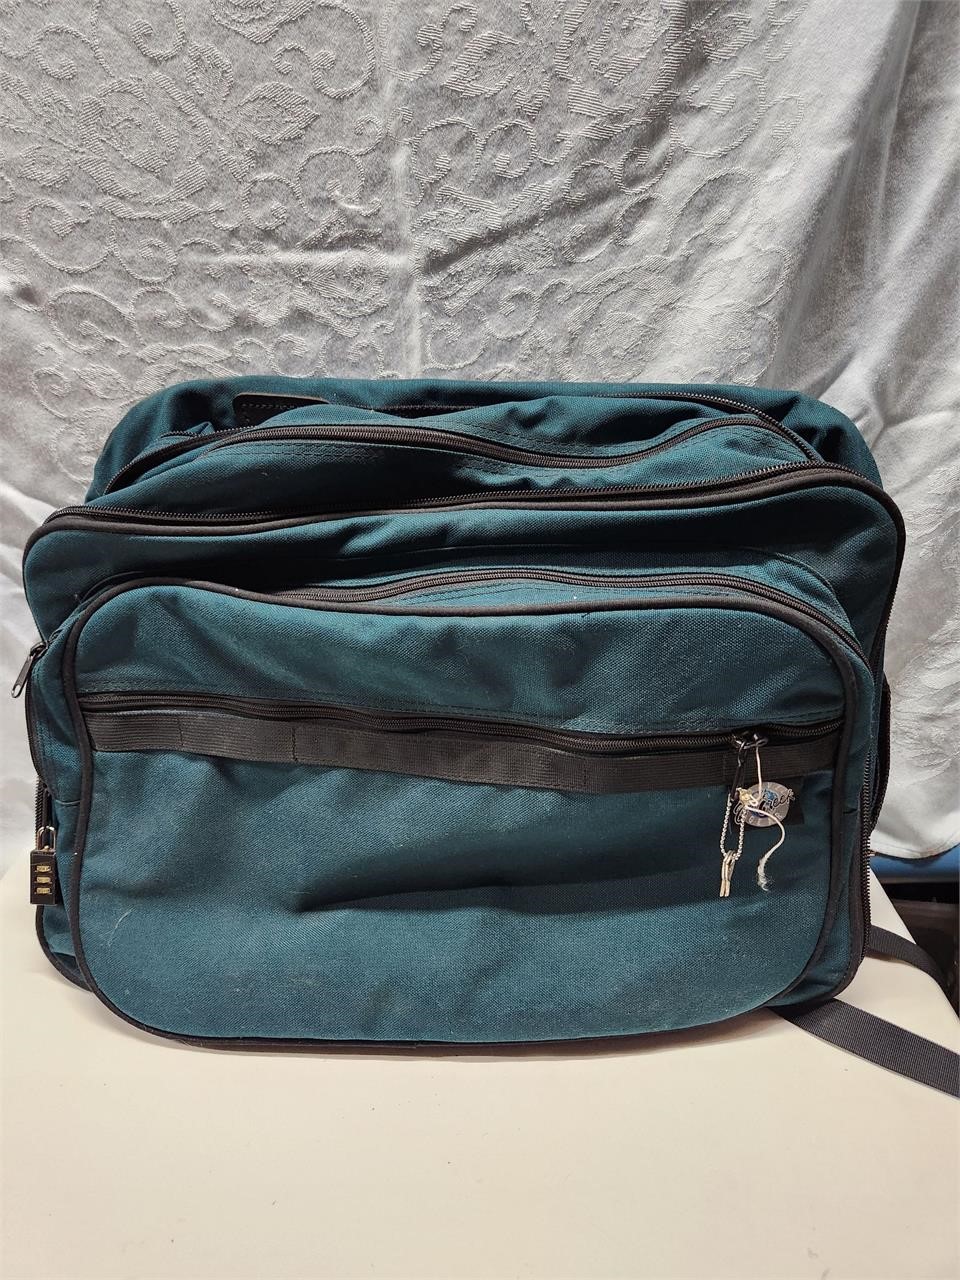 Multizipper Bag with Backpack Straps